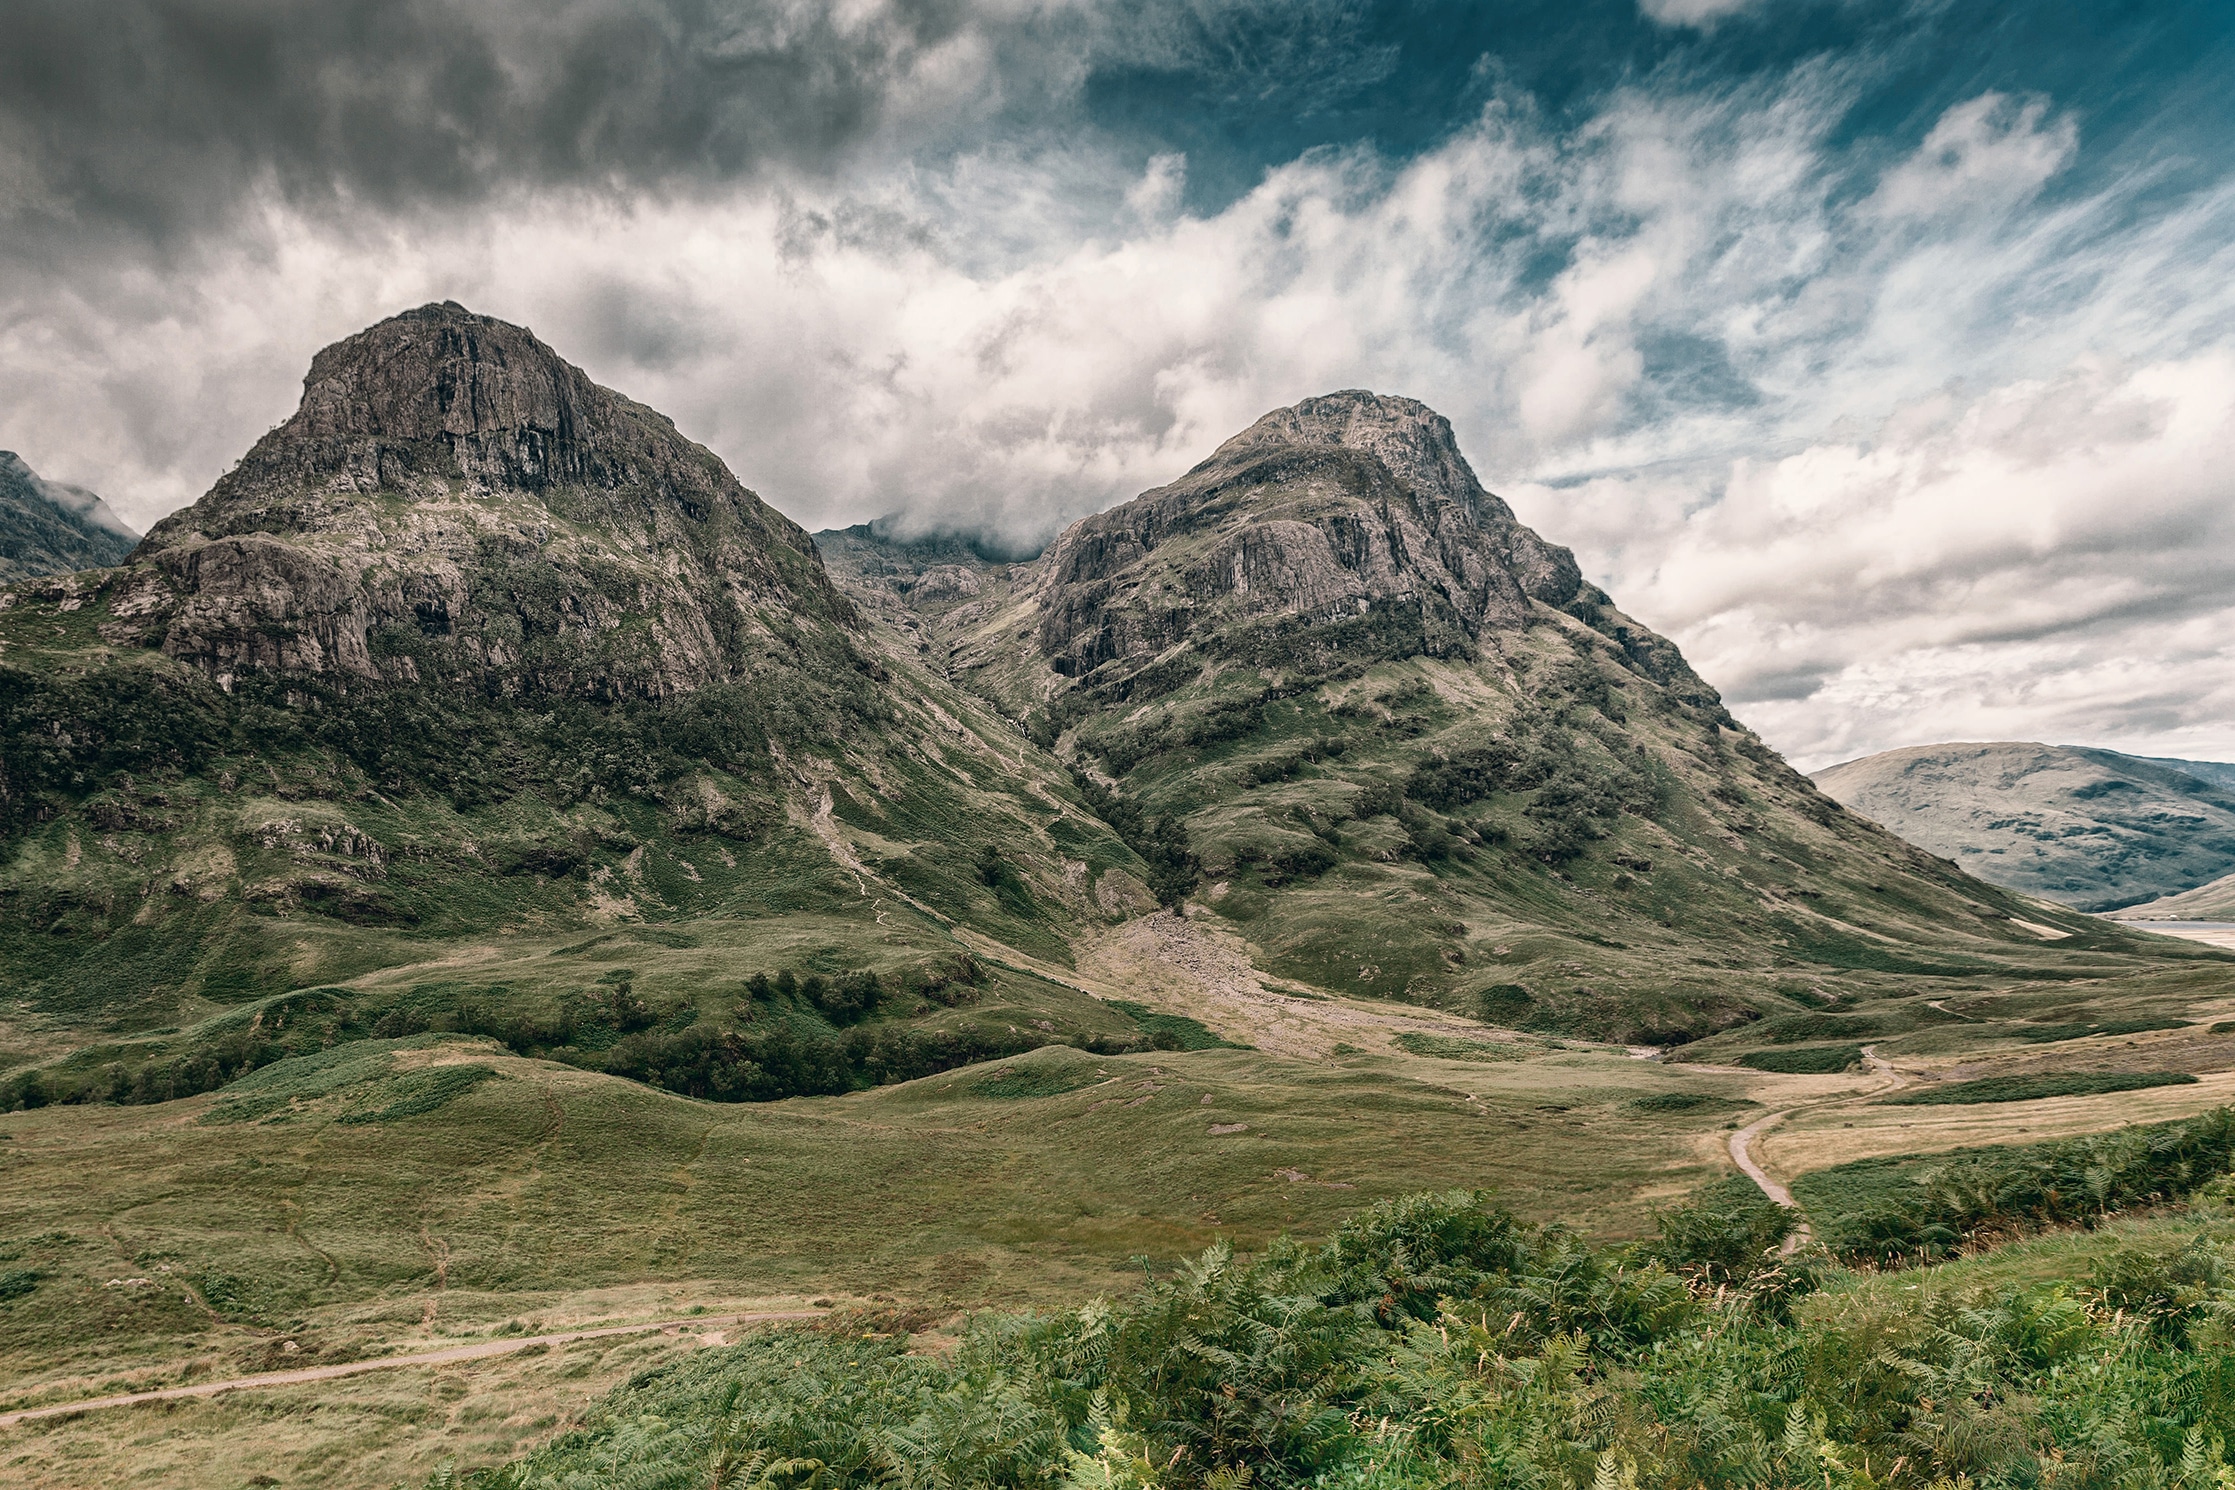 Two mountain peaks in the Scottish Highlands